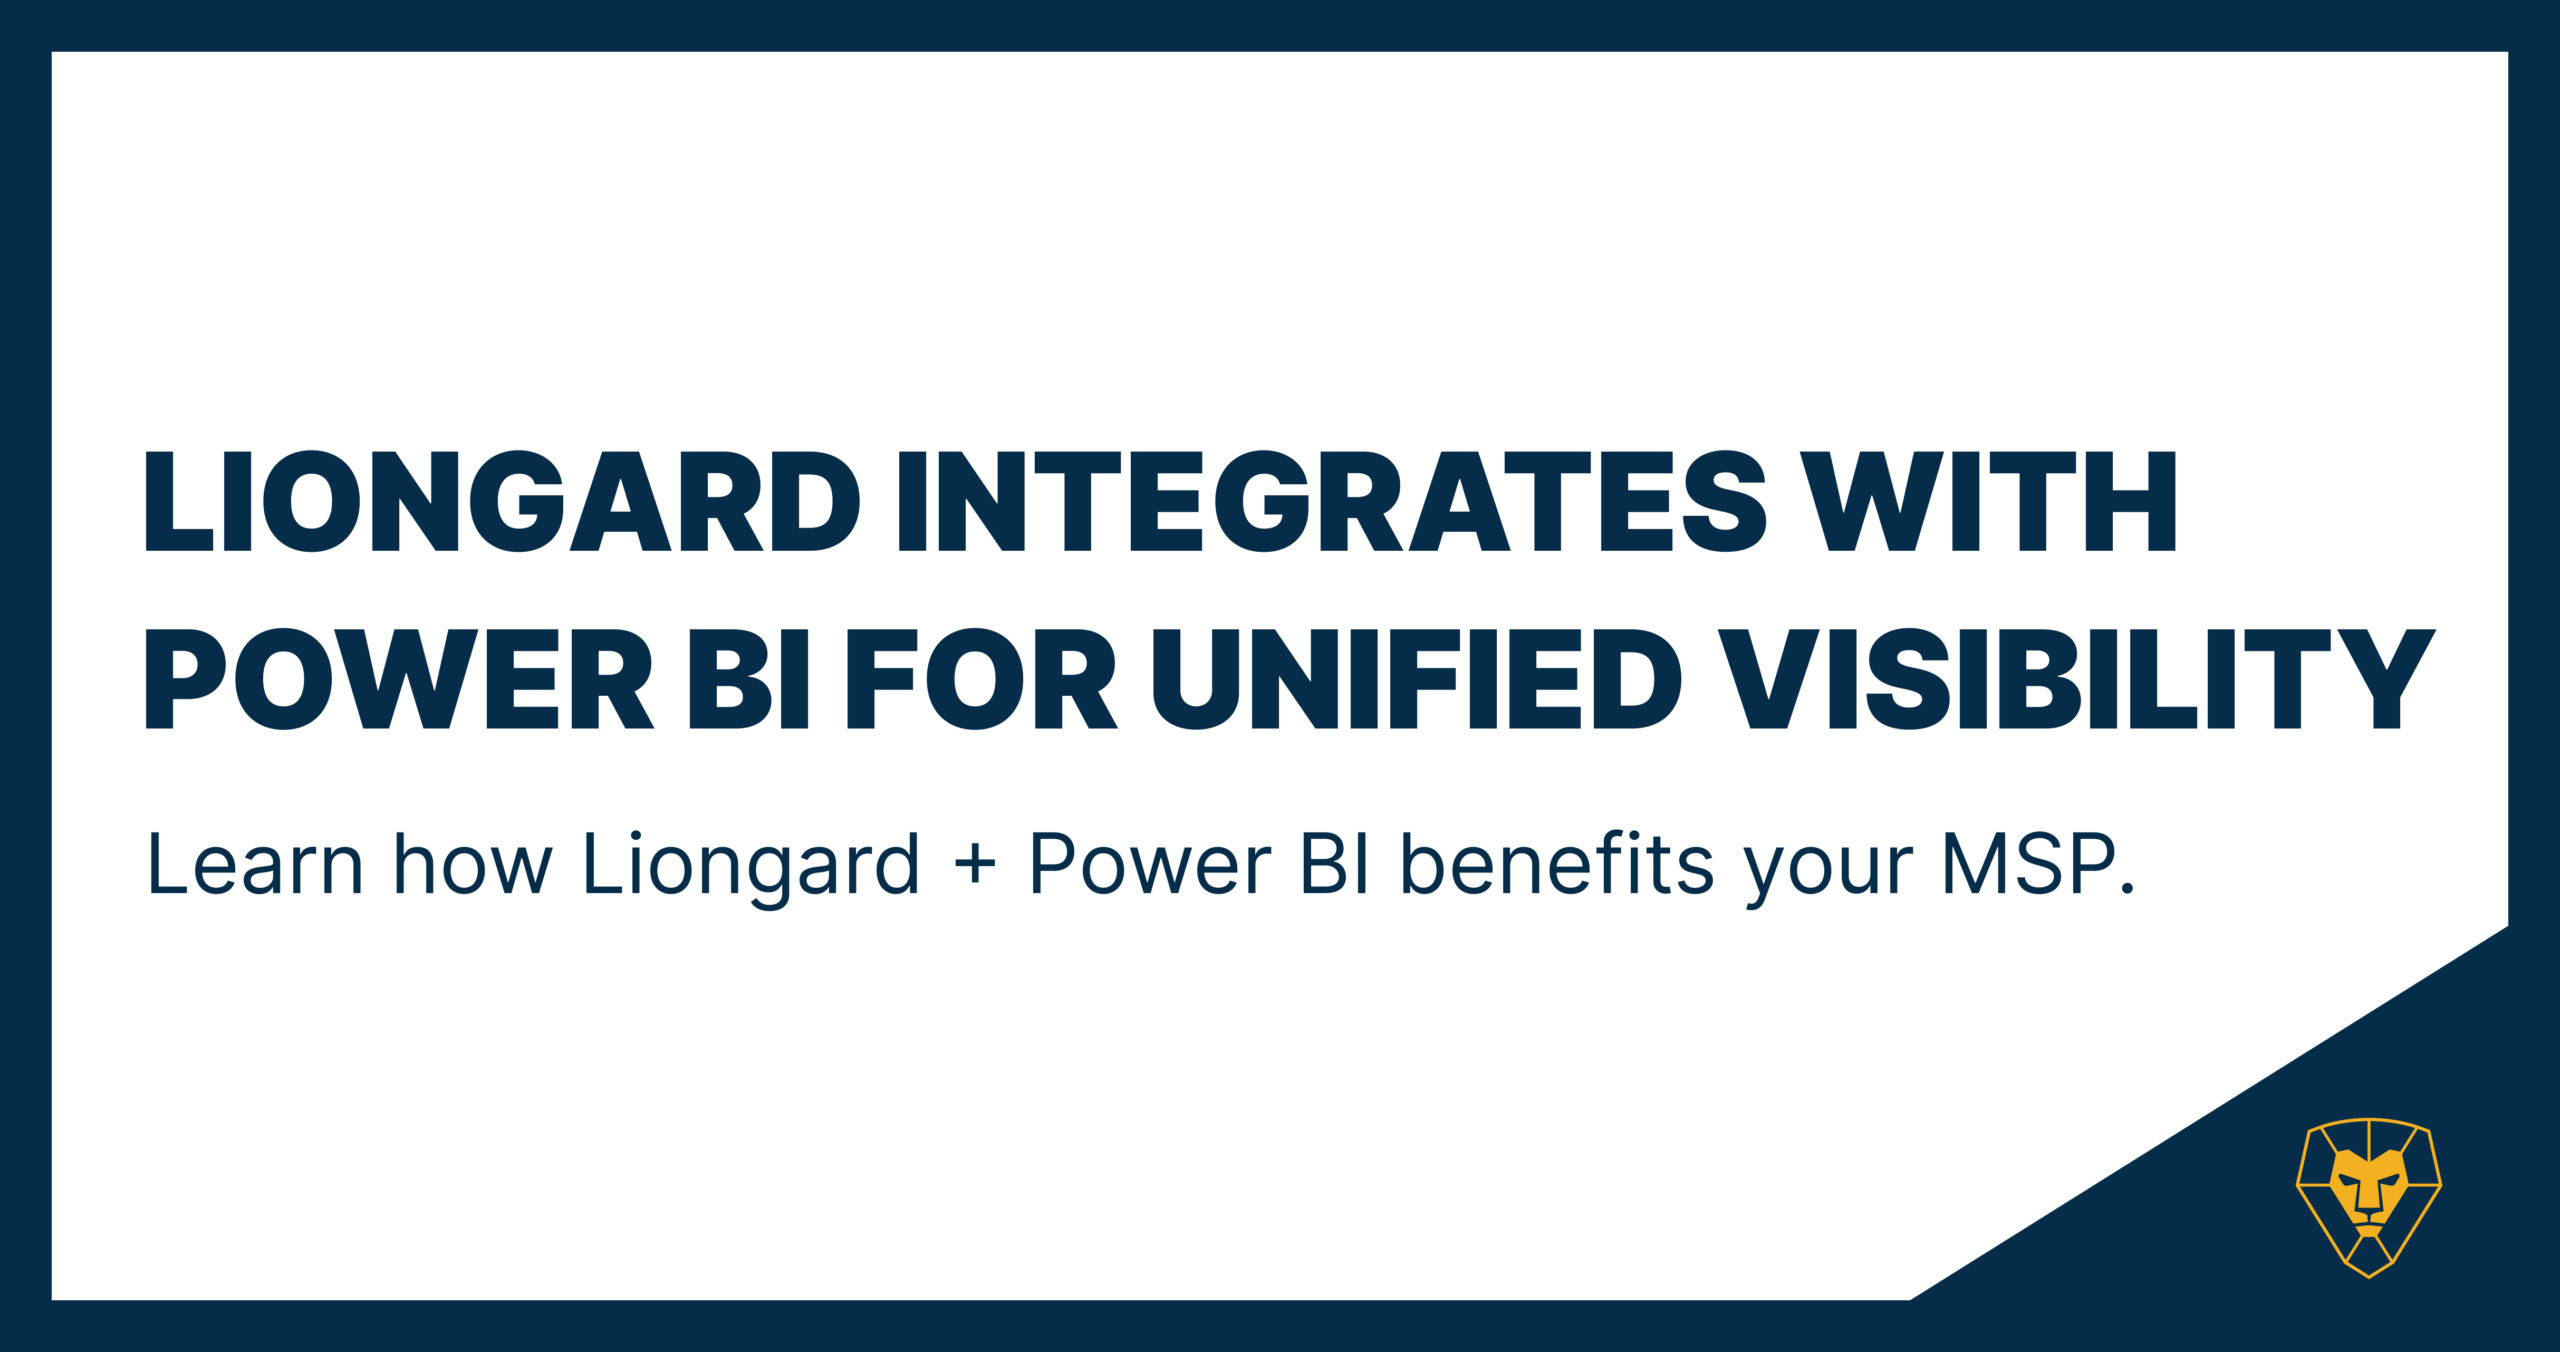 Liongard Integrates with PowerBI for Unified Visibility